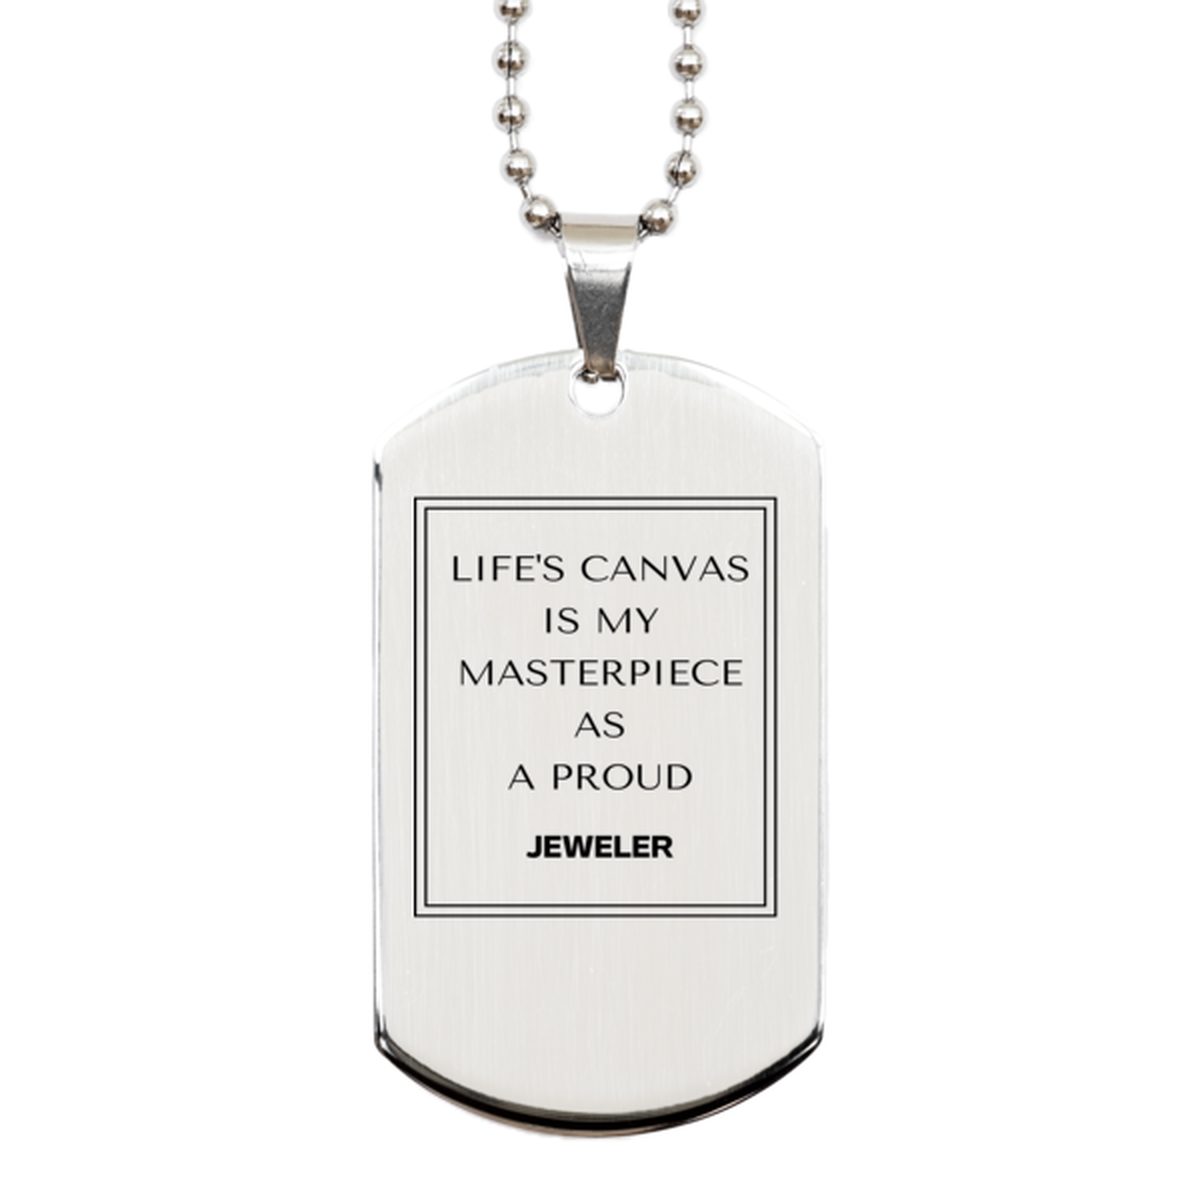 Proud Jeweler Gifts, Life's canvas is my masterpiece, Epic Birthday Christmas Unique Silver Dog Tag For Jeweler, Coworkers, Men, Women, Friends